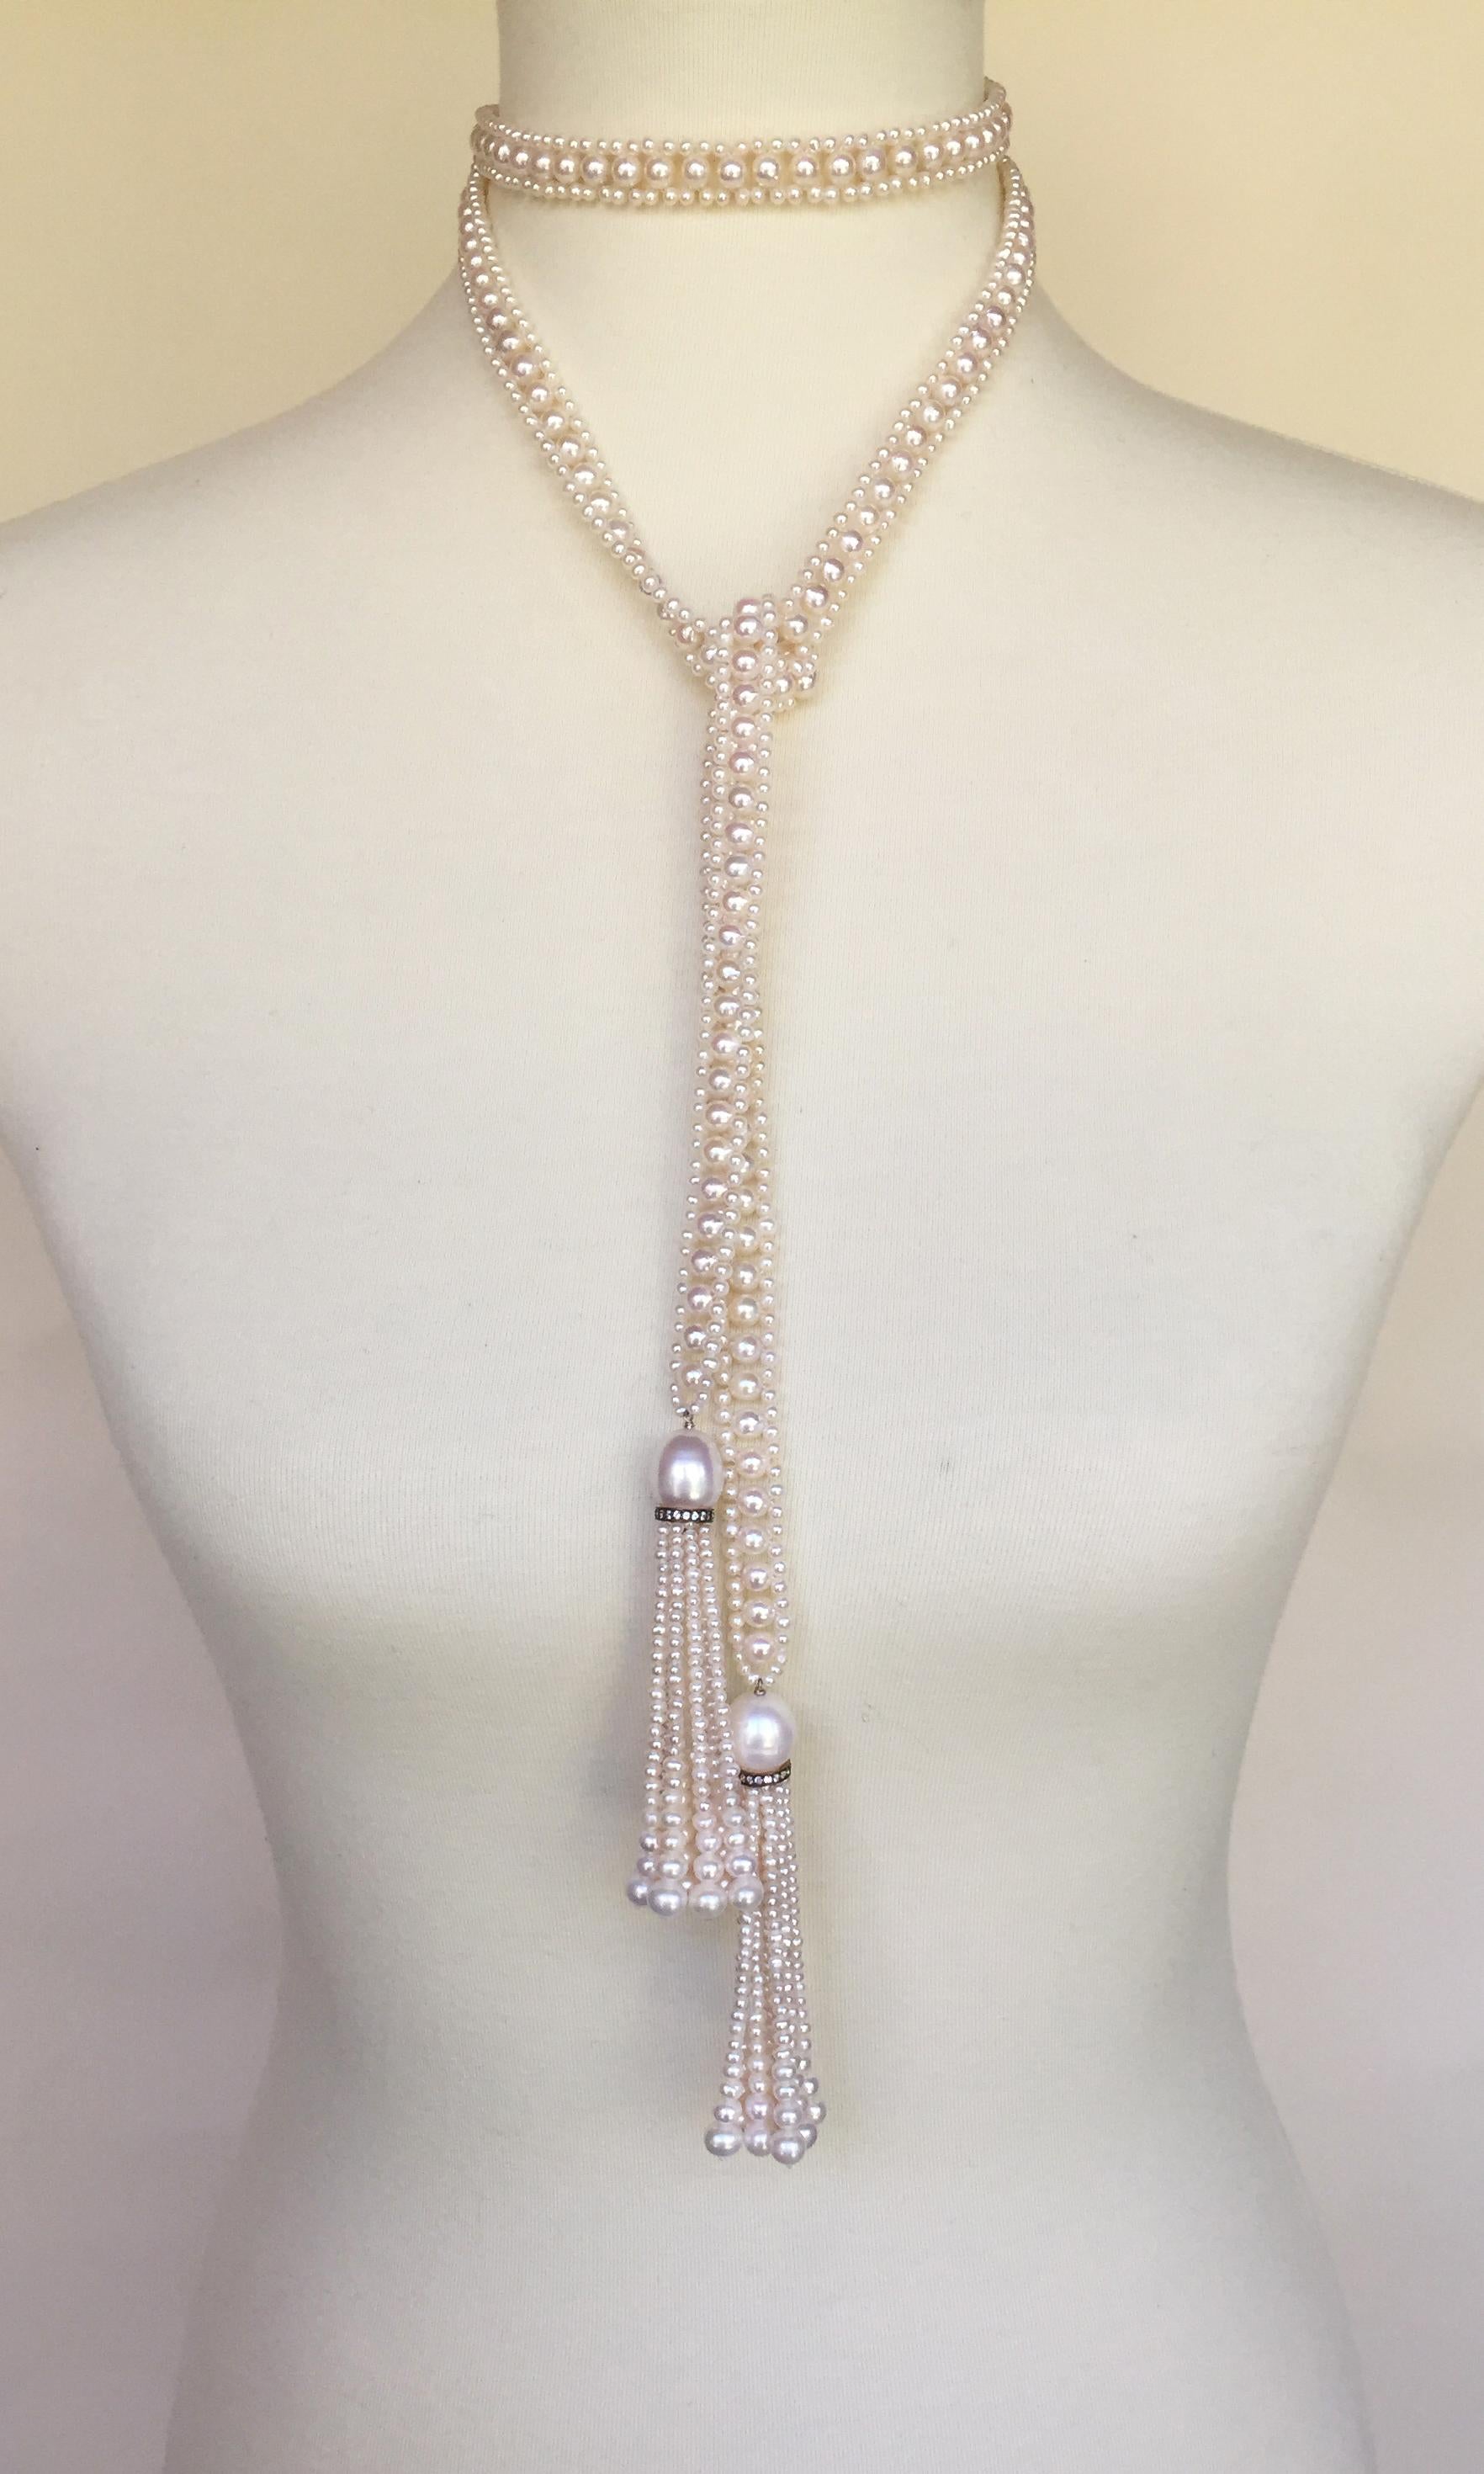 This white pearl rope sautoir necklace with white pearl and diamond tassels is the essence of classic elegance. Handcrafted by Marina J. each pearl was chosen for its beautiful shape and glowing white color. The rope-like design is graceful and